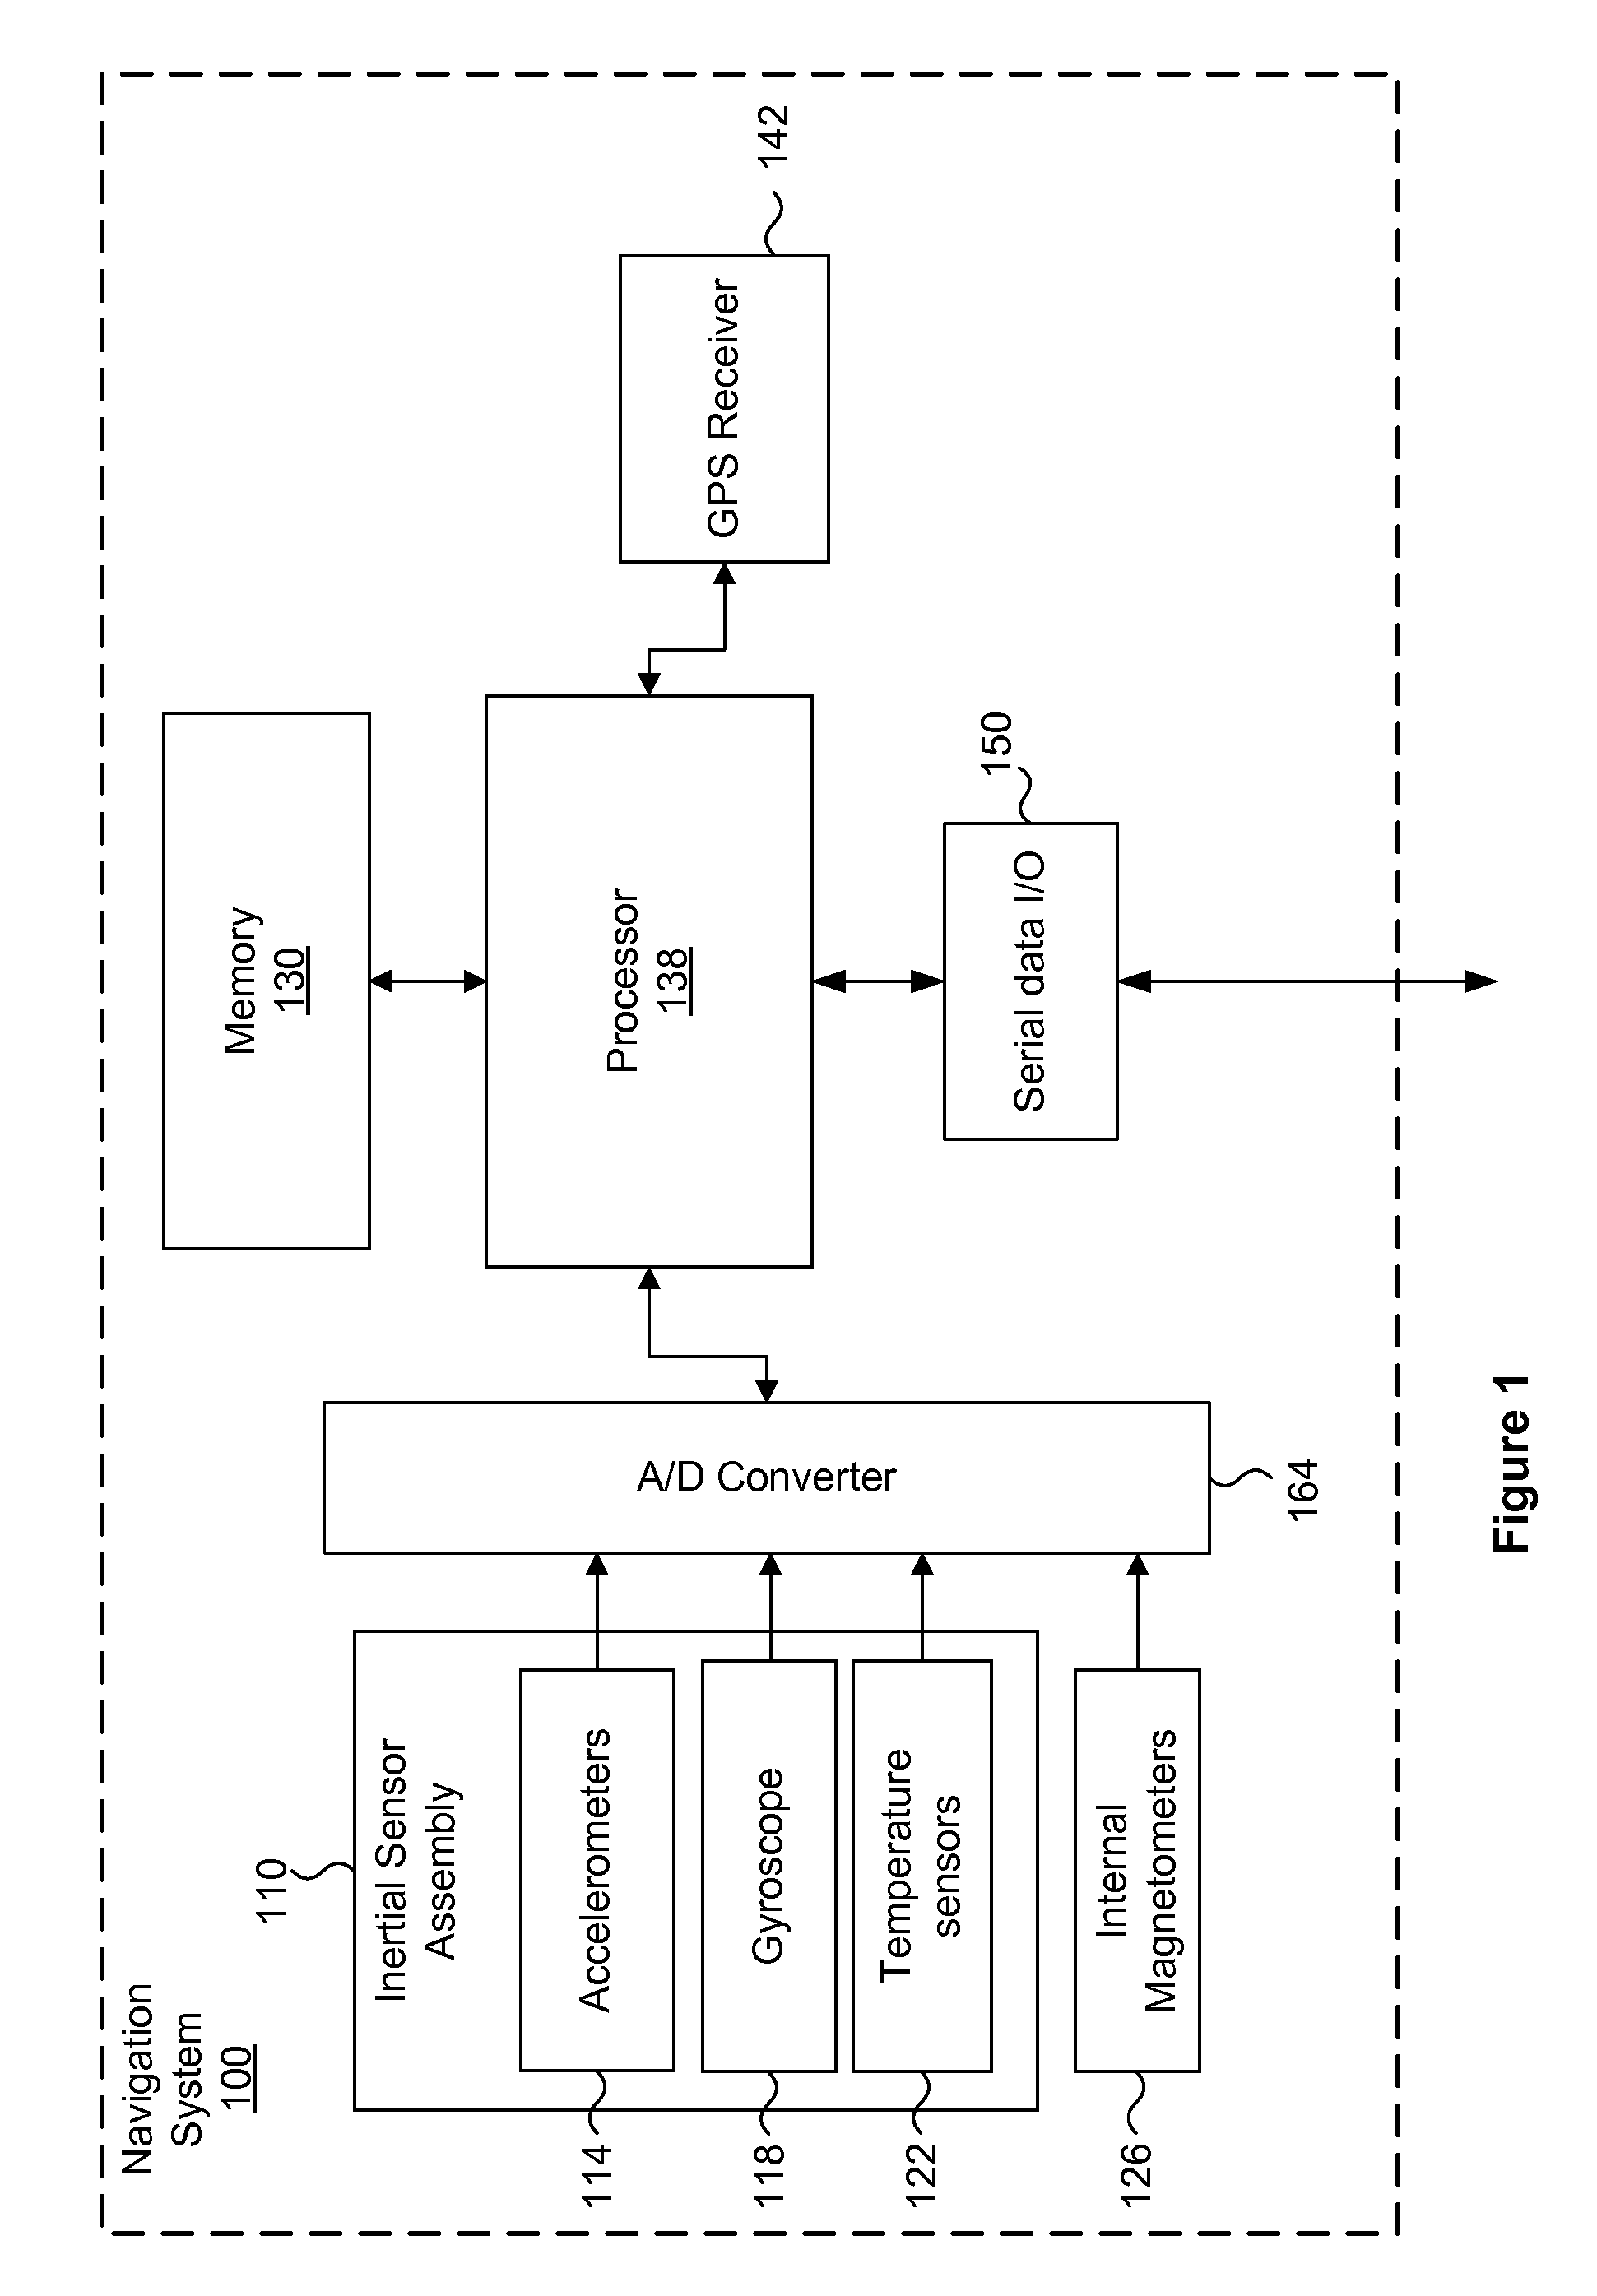 Configurable inertial navigation system with dual extended kalman filter modes